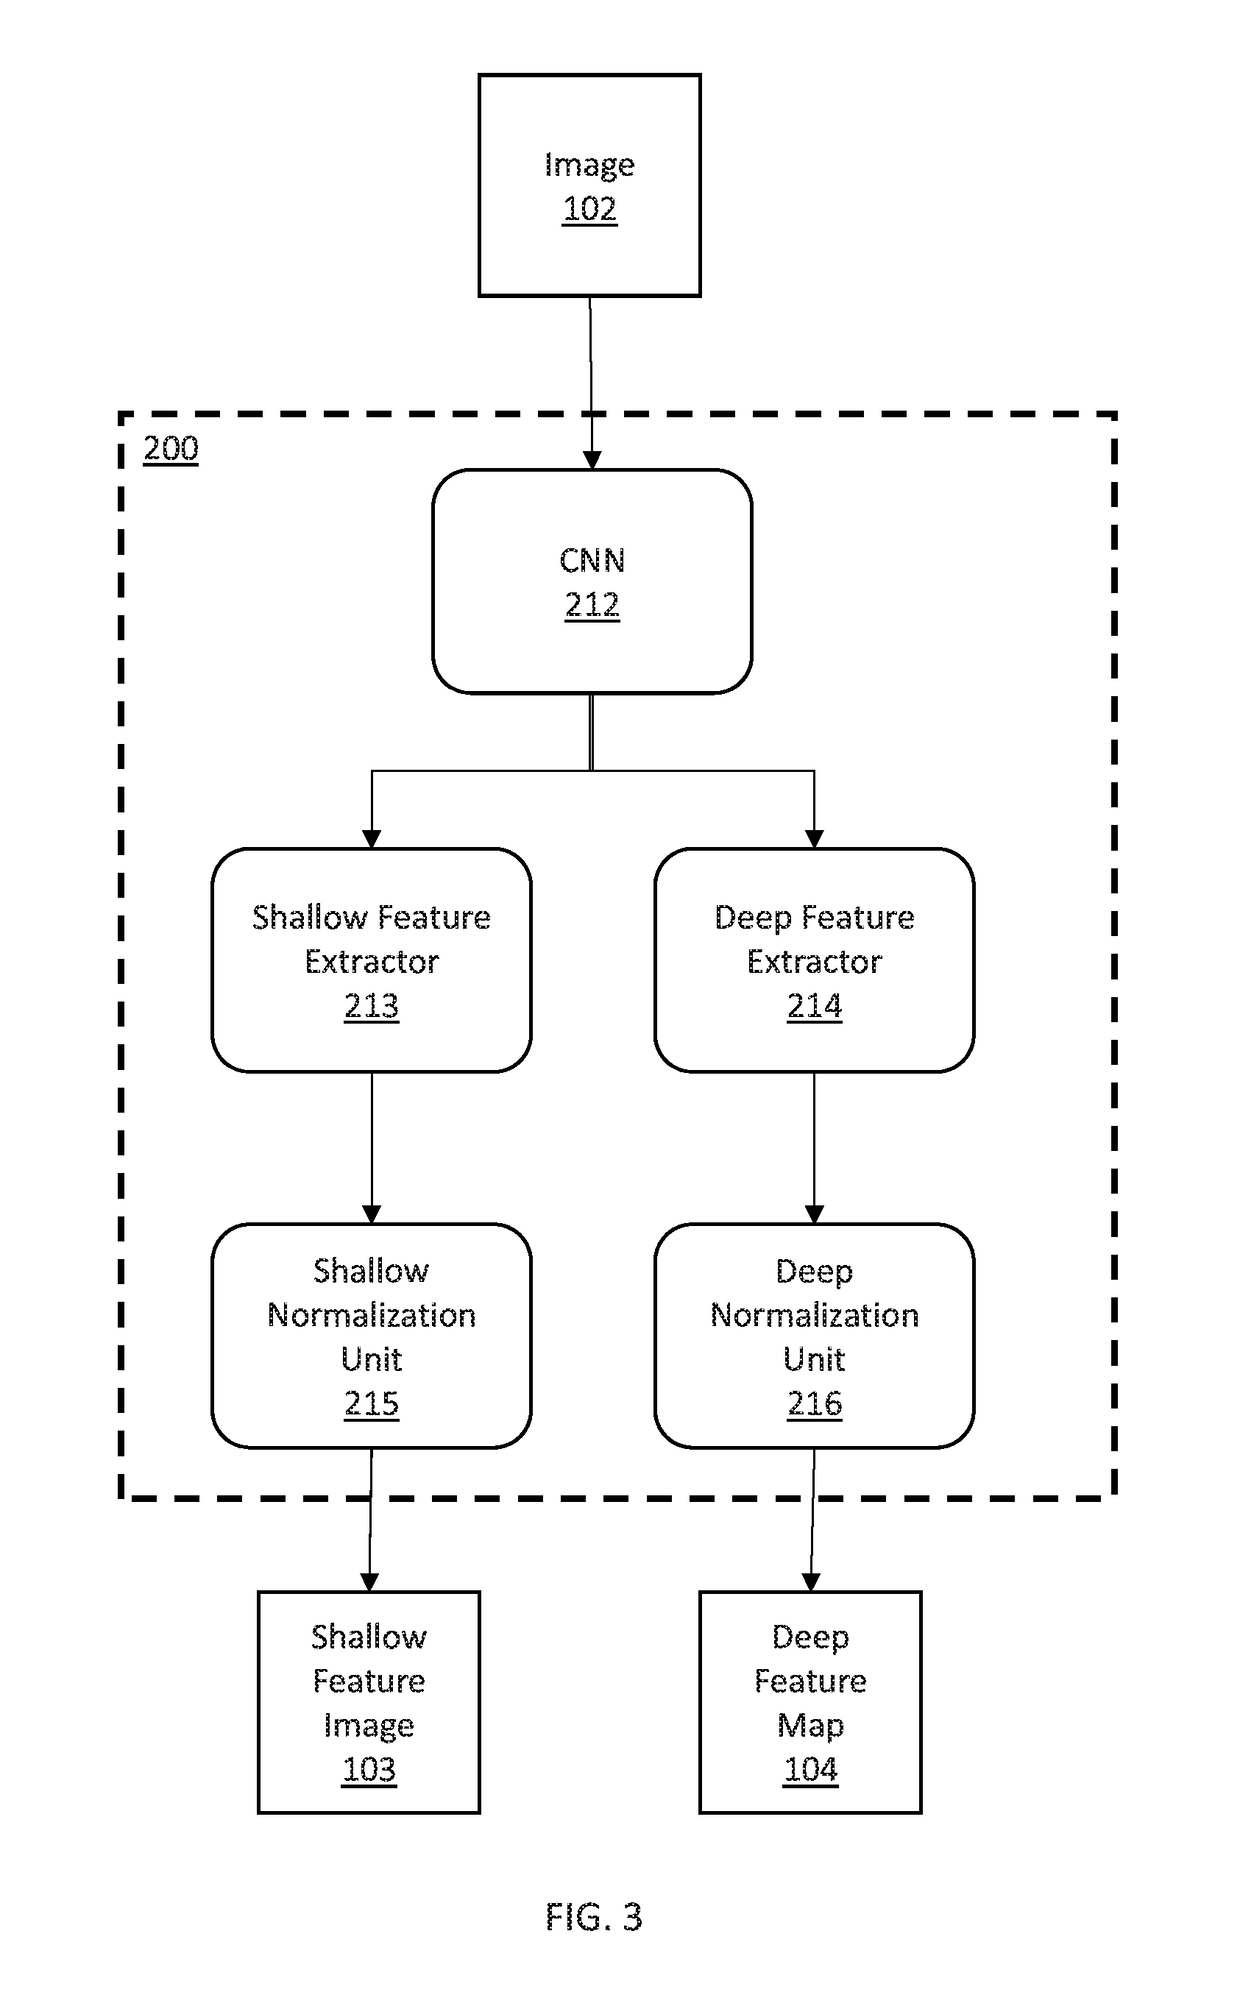 Computer aided traffic enforcement using dense correspondence estimation with multi-level metric learning and hierarchical matching